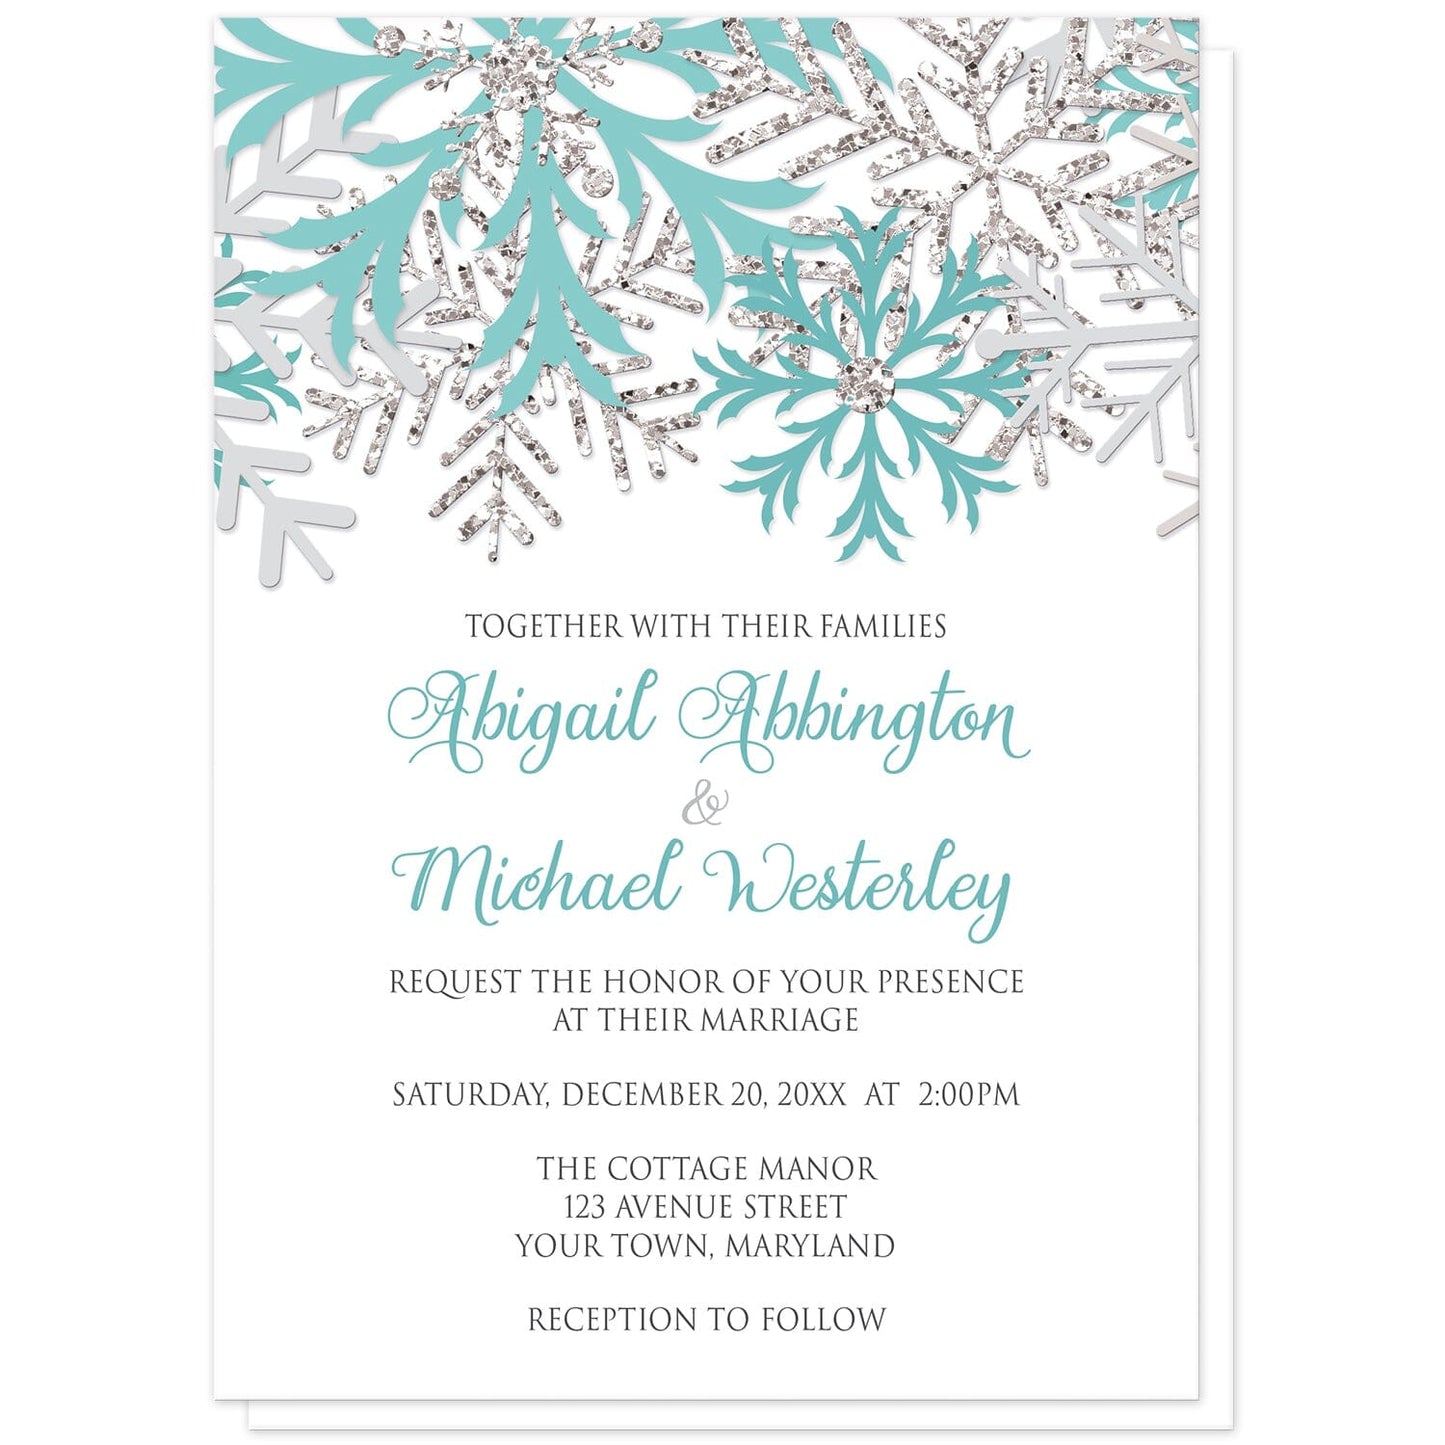 Winter Teal Silver Snowflake Wedding Invitations at Artistically Invited. Beautiful winter teal silver snowflake wedding invitations designed with teal, light teal, silver-colored glitter-illustrated, and light gray snowflakes along the top over a white background. Your personalized marriage celebration details are custom printed in teal and gray below the pretty snowflakes.